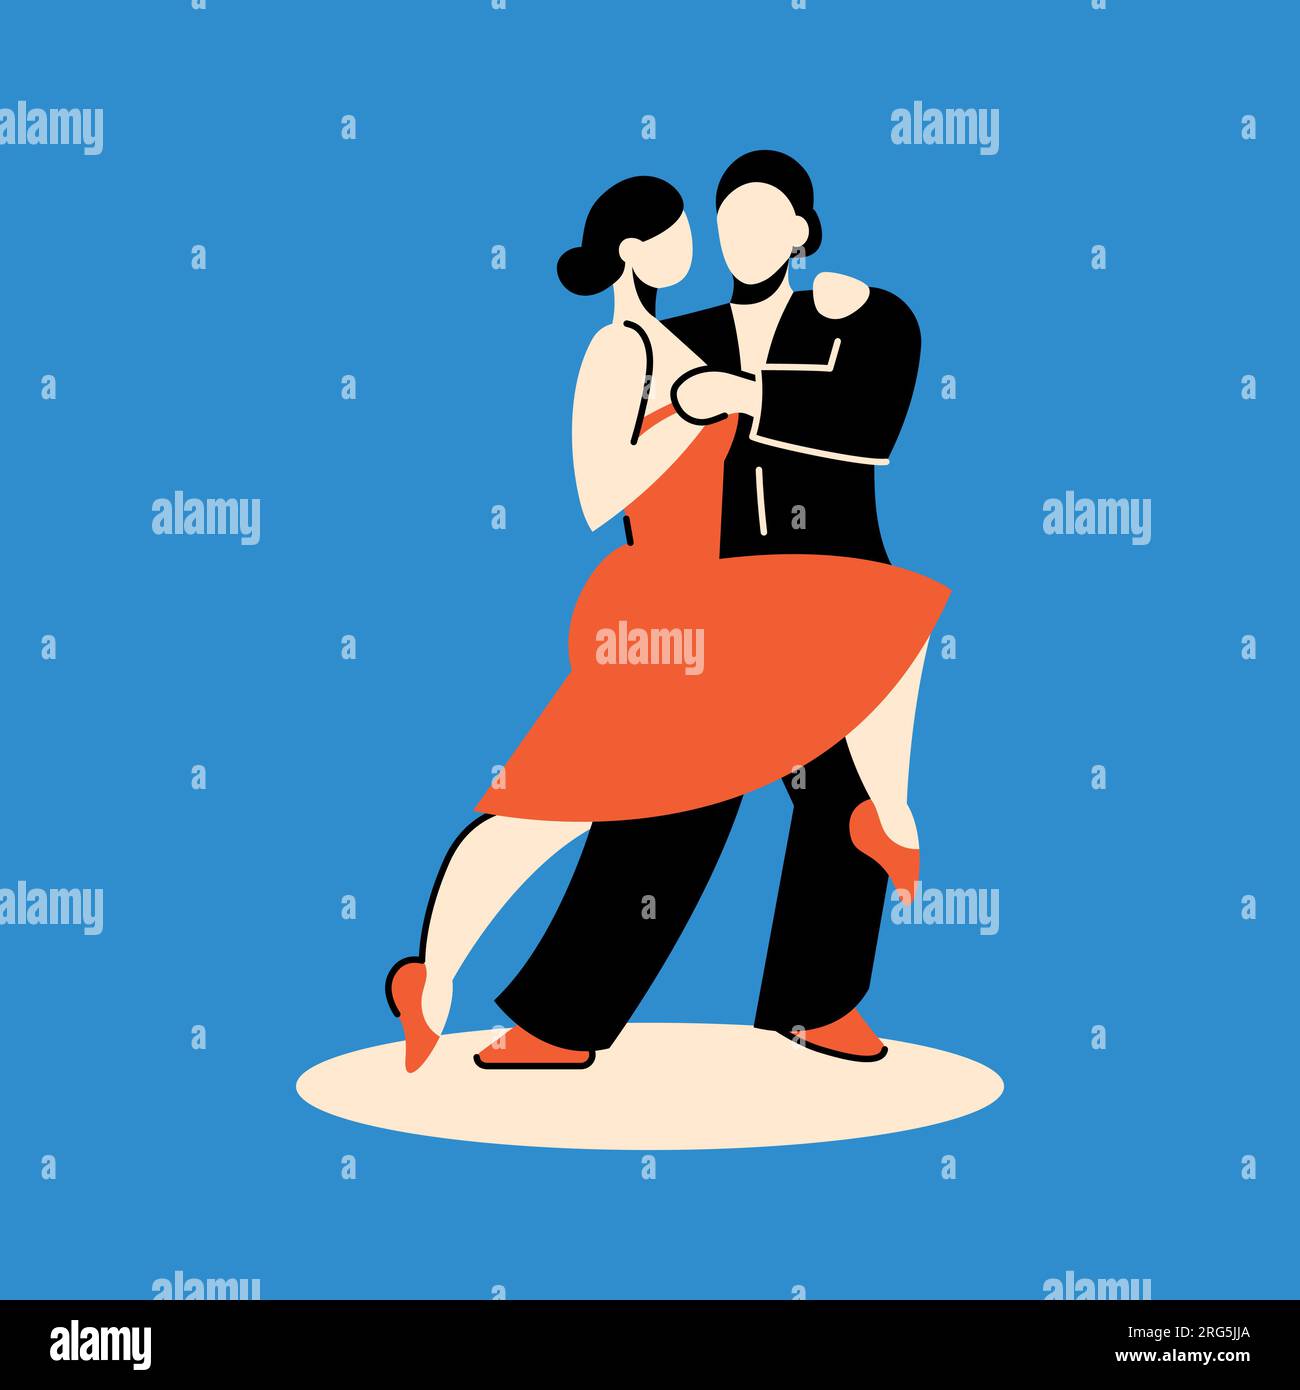 Couple dancing tango color concept. Digital illustration for web page, mobile app, promo. Stock Vector